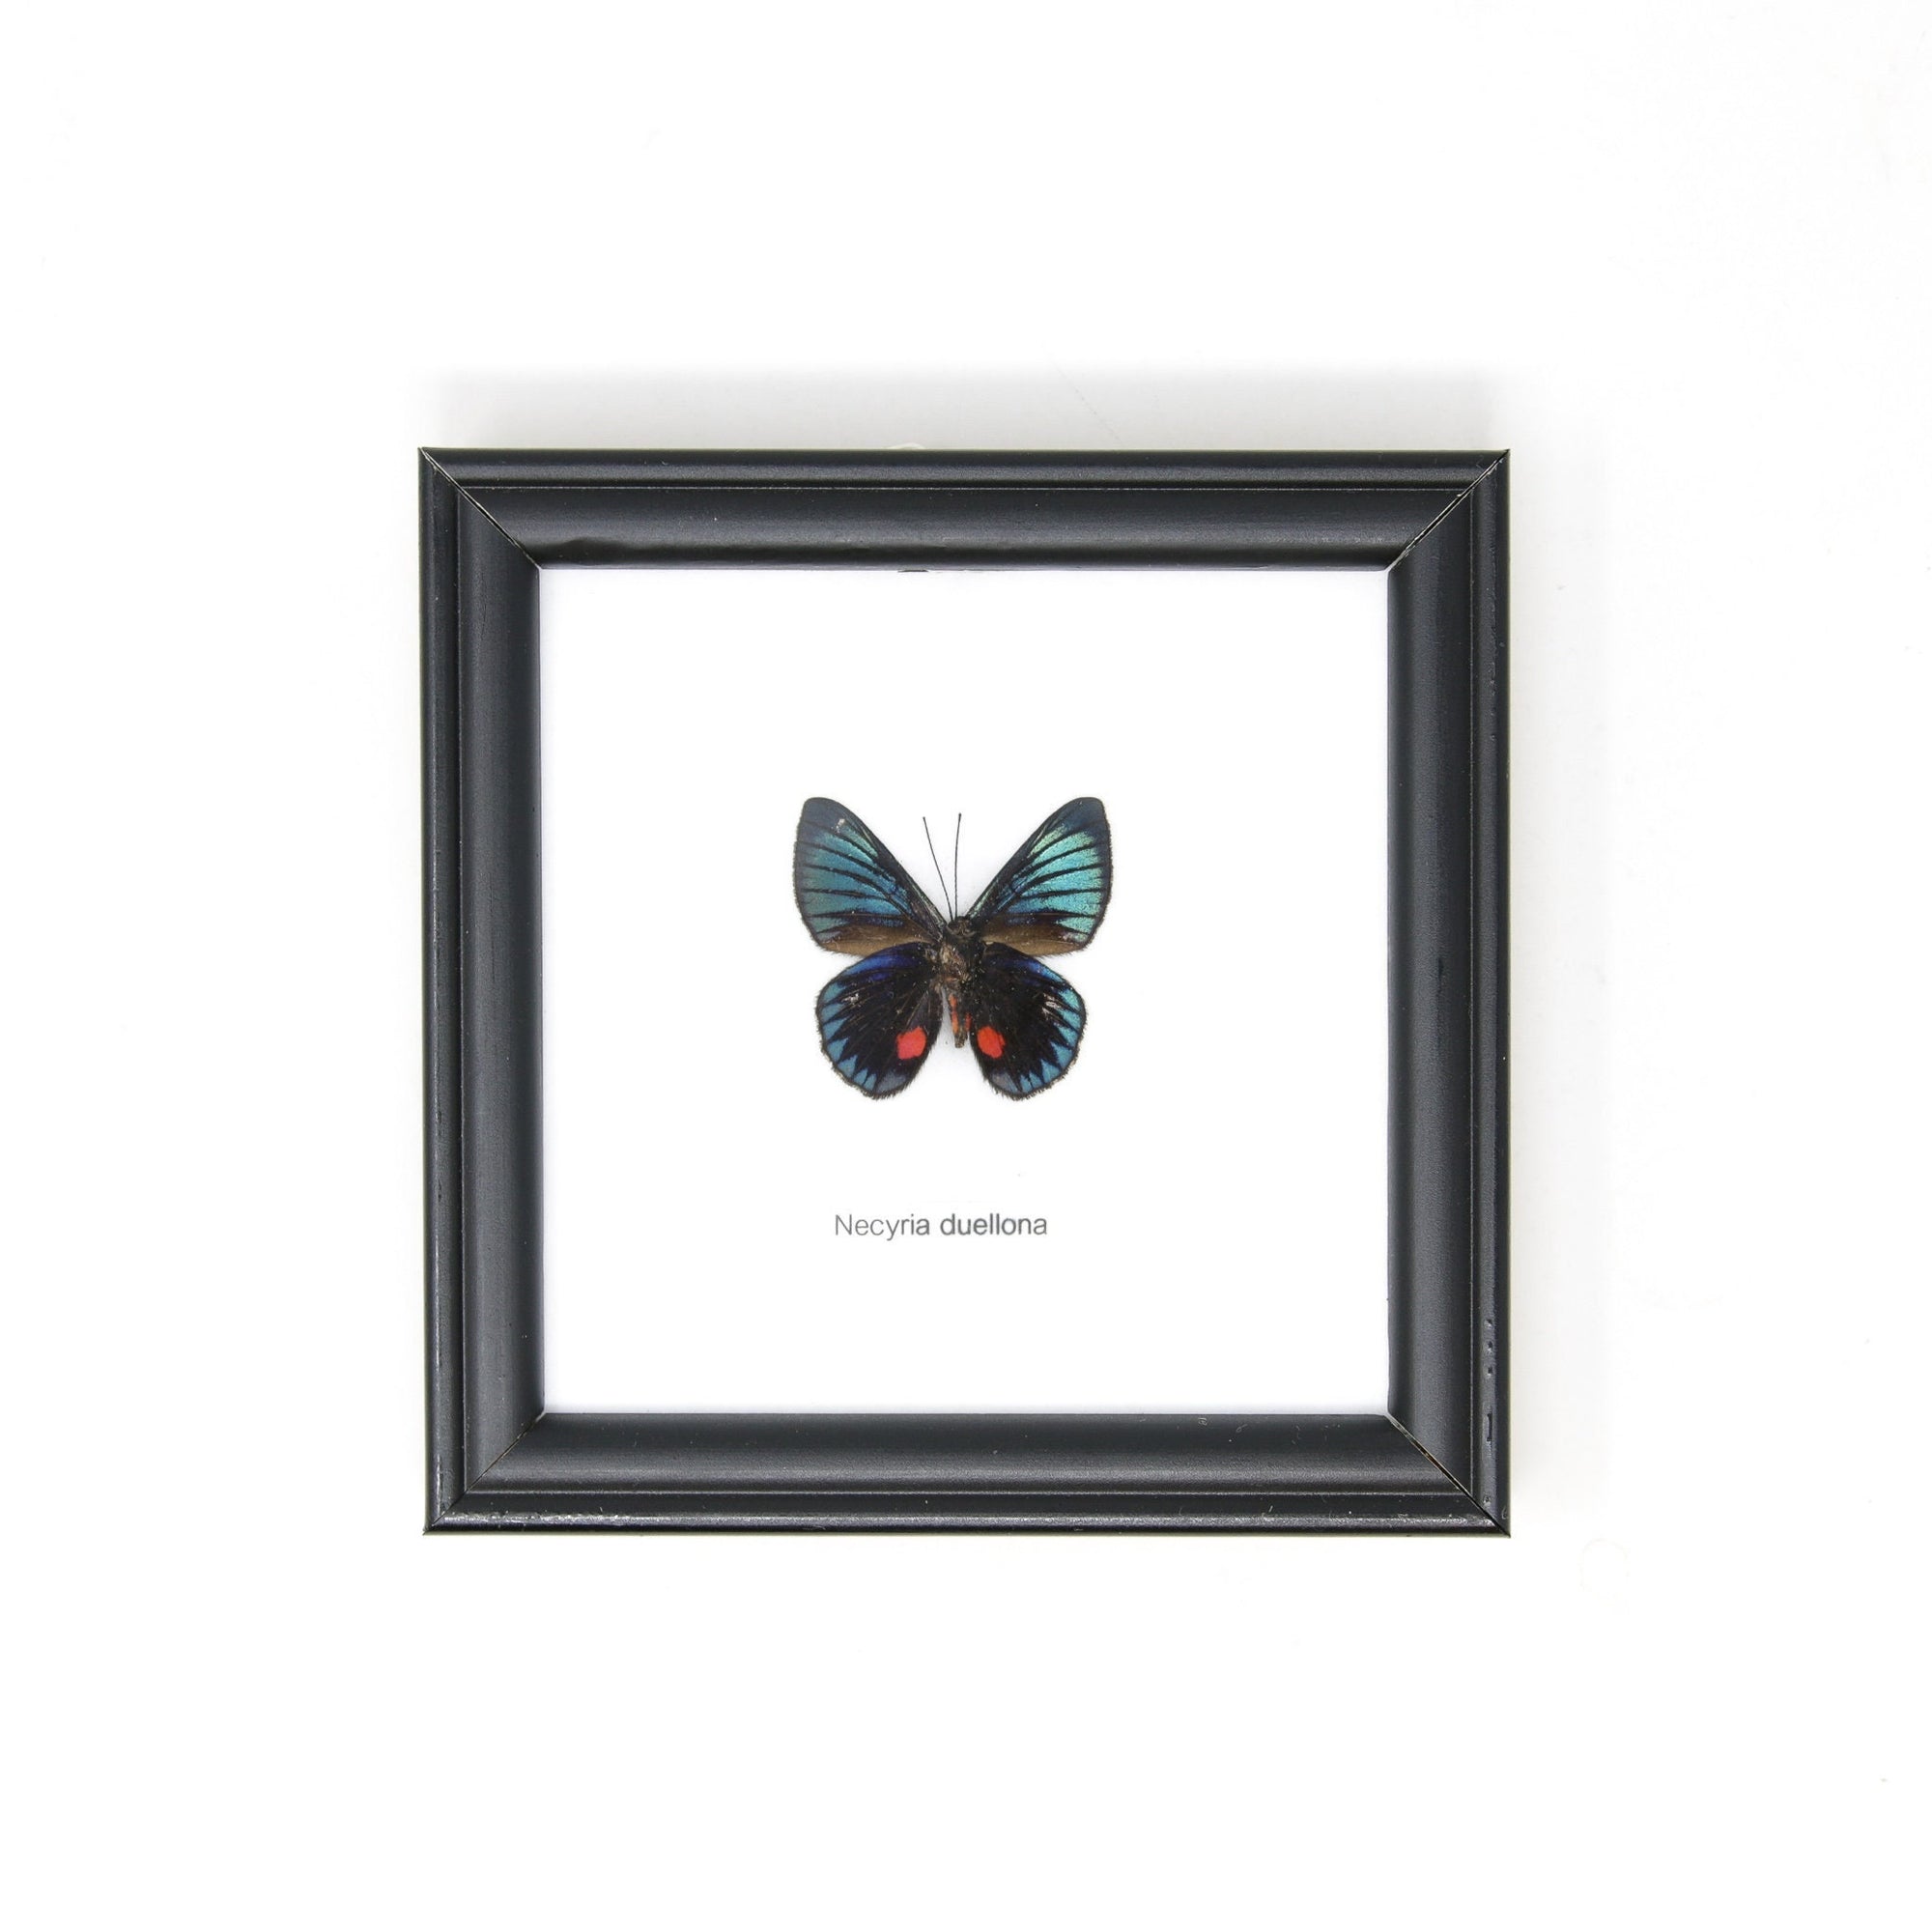 The Peru Metalmark (Necyria duellona) | Real Butterfly Mounted Under Glass, Wall Hanging Home Décor Framed 5 x 5 In. Gift Boxed